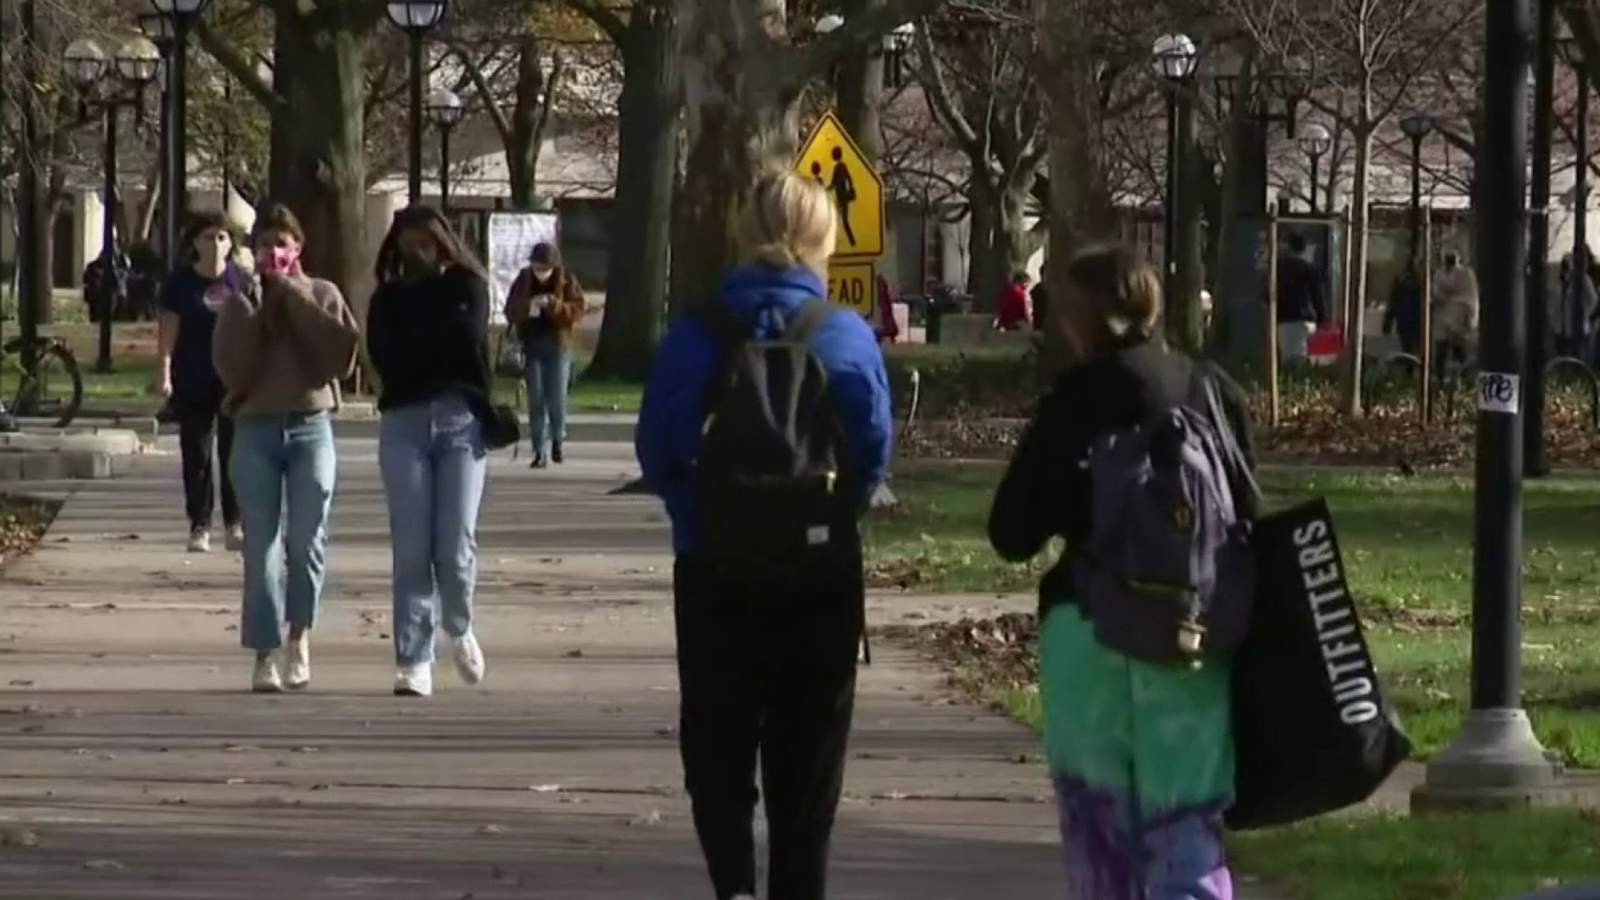 University of Michigan students asked to test for COVID-19 before going home for holidays